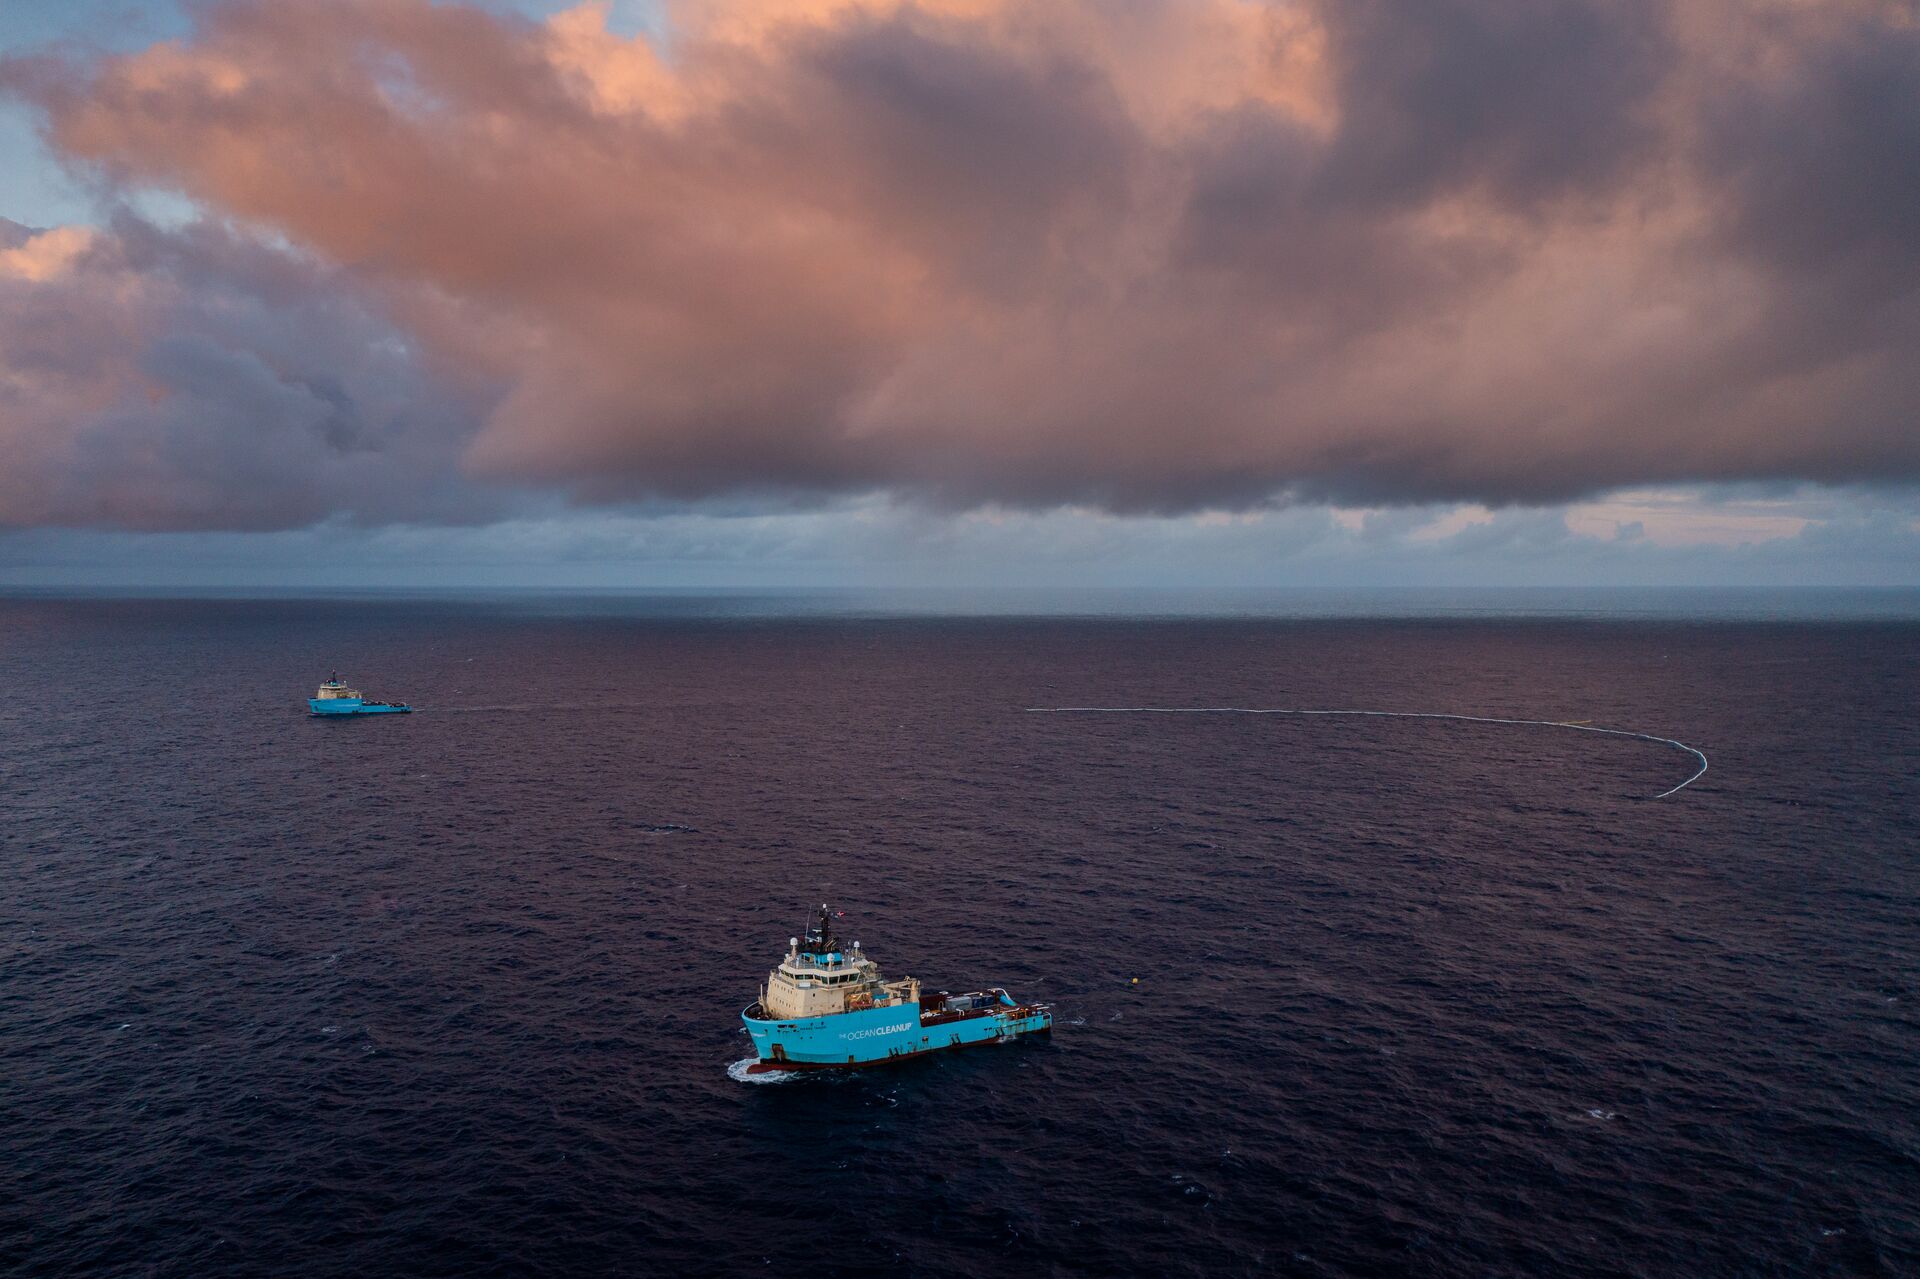 Successful plastic-harvesting trial with Maersk Supply Service vessels